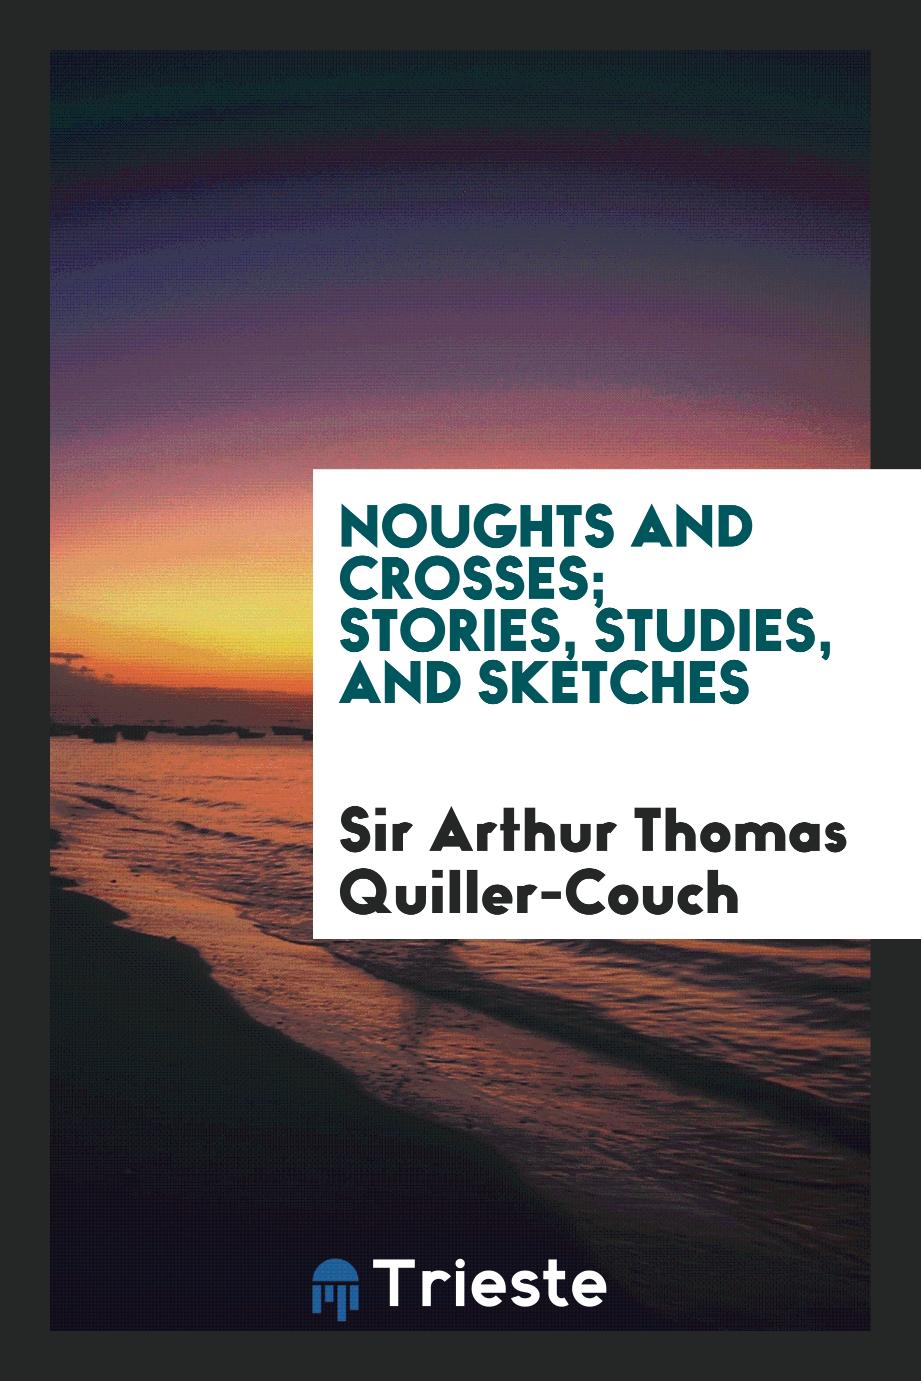 Noughts and crosses; stories, studies, and sketches